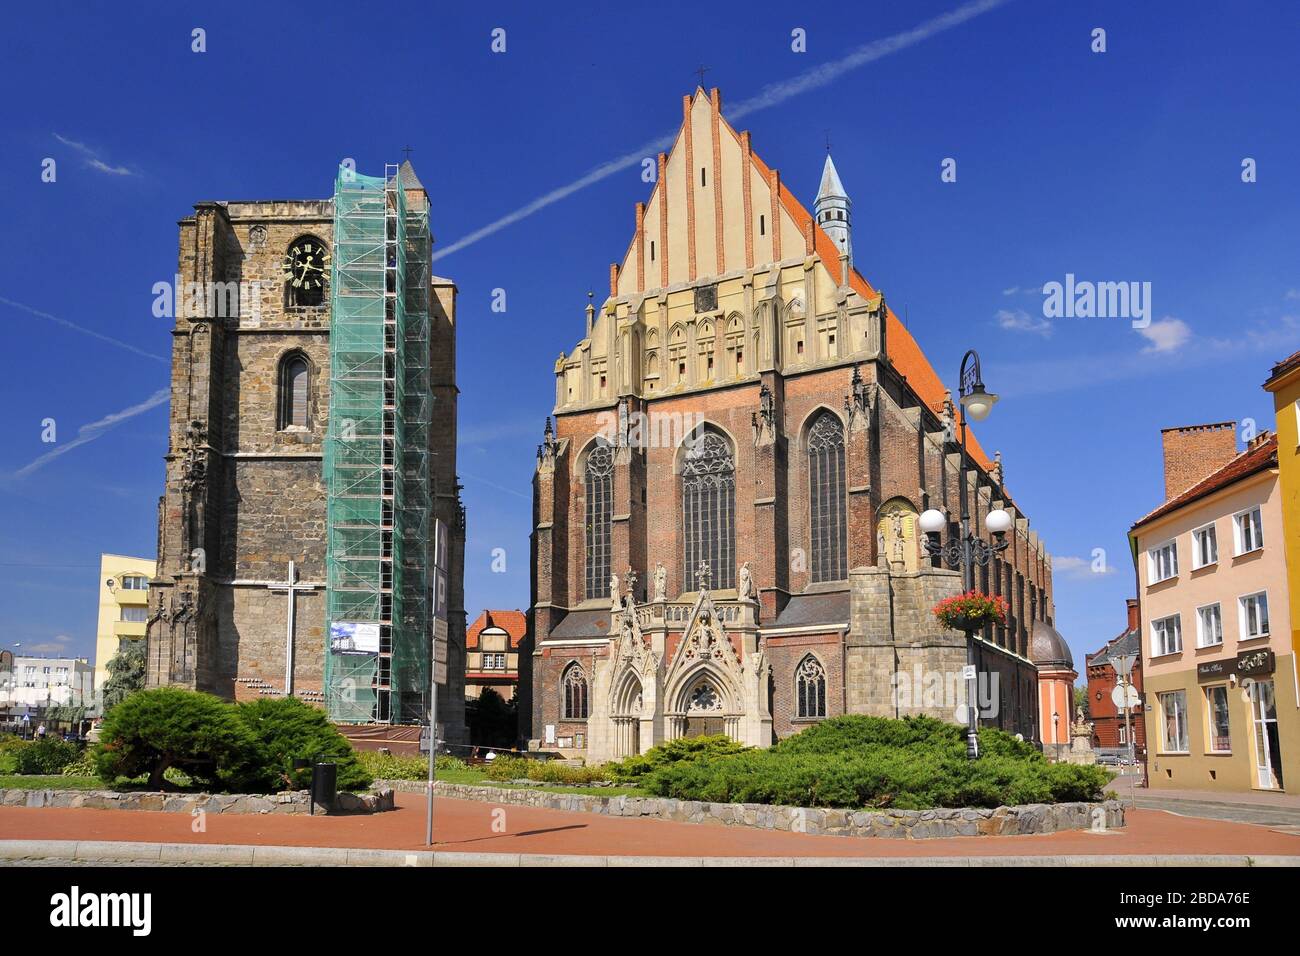 Cathedral of St. James and St. Agnes. Nysa, Opole Voivodeship, Poland. Stock Photo